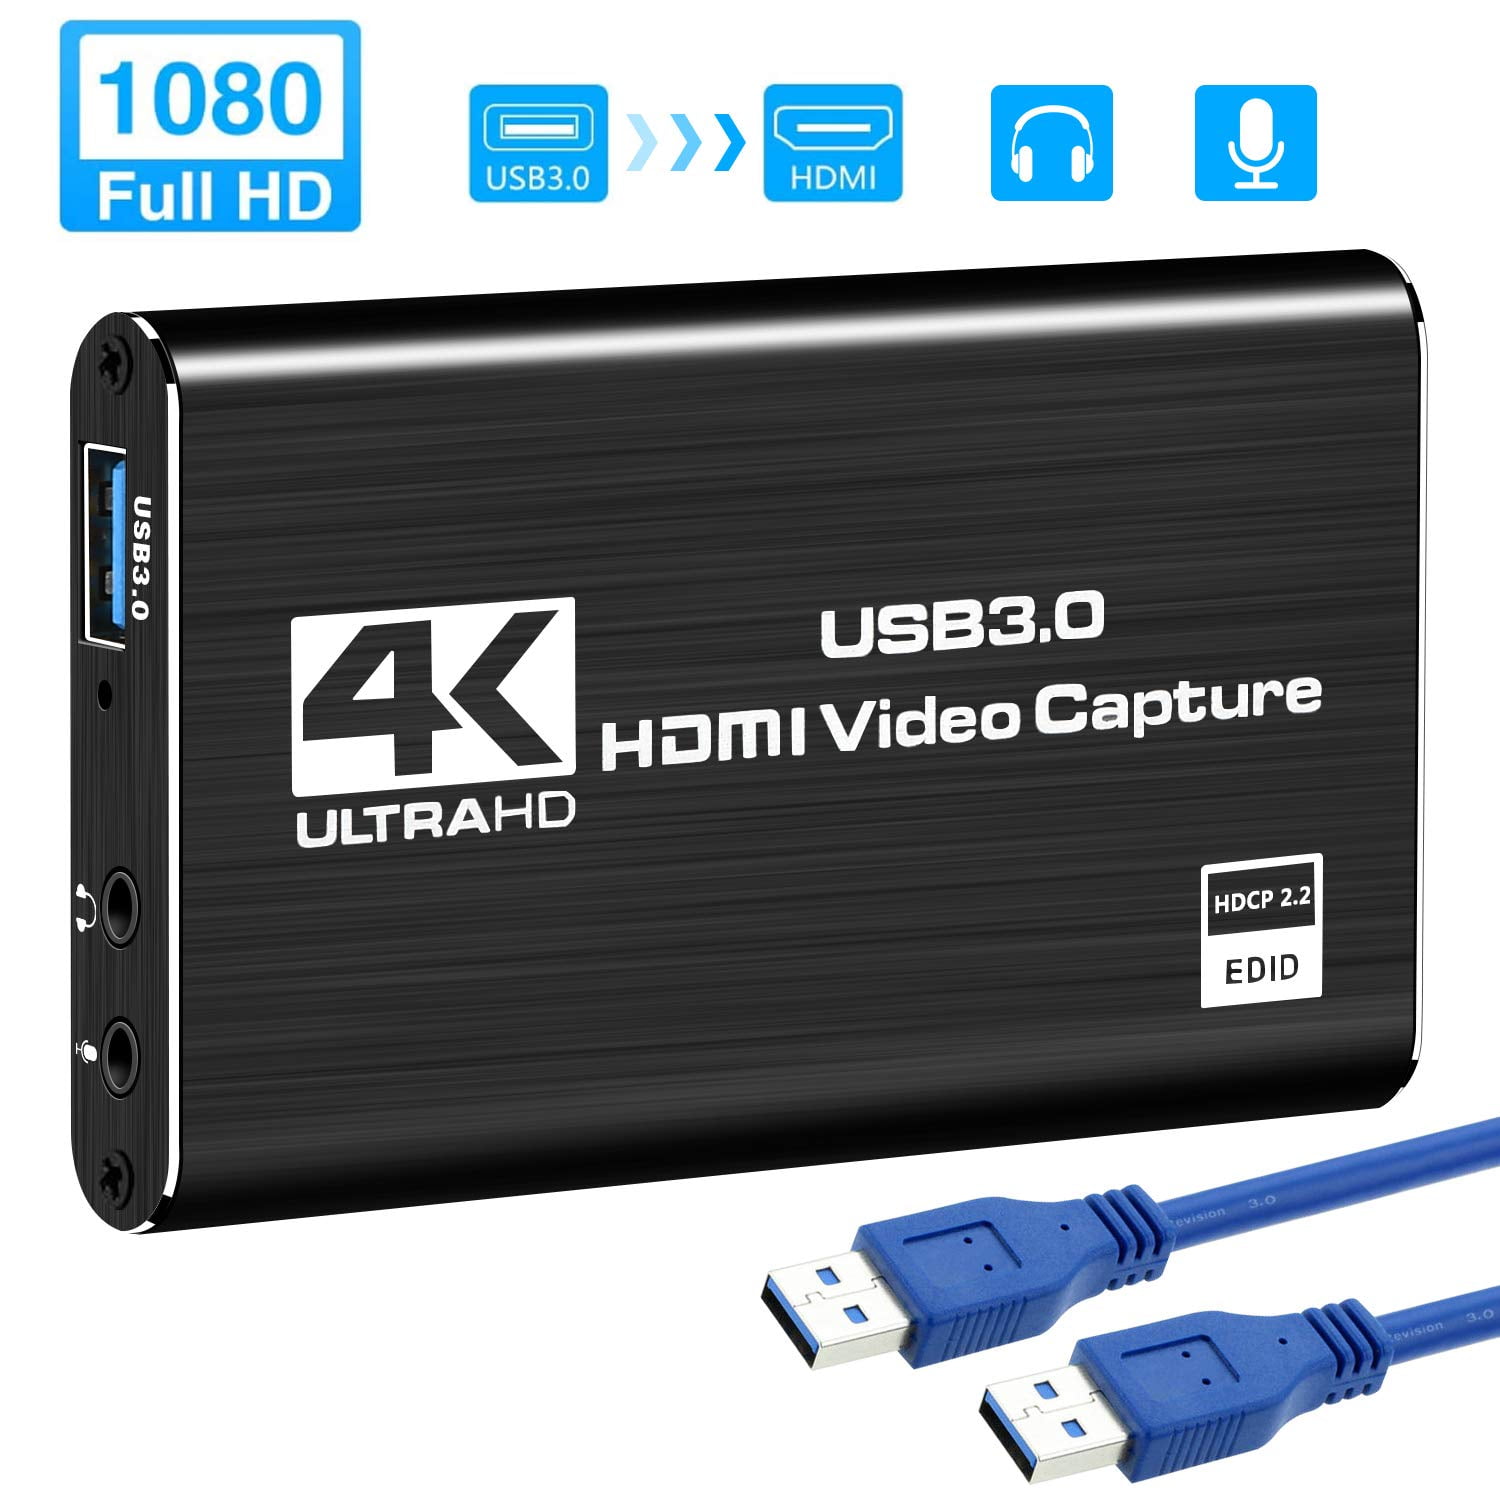 ANSTEN Video Capture Card, HDMI USB3.0 4K 60HZ Game Capture Device Support Linux OS X System OBS YouTube Twitch Streaming Recording for PS4 Xbox One Game Use - Walmart.com